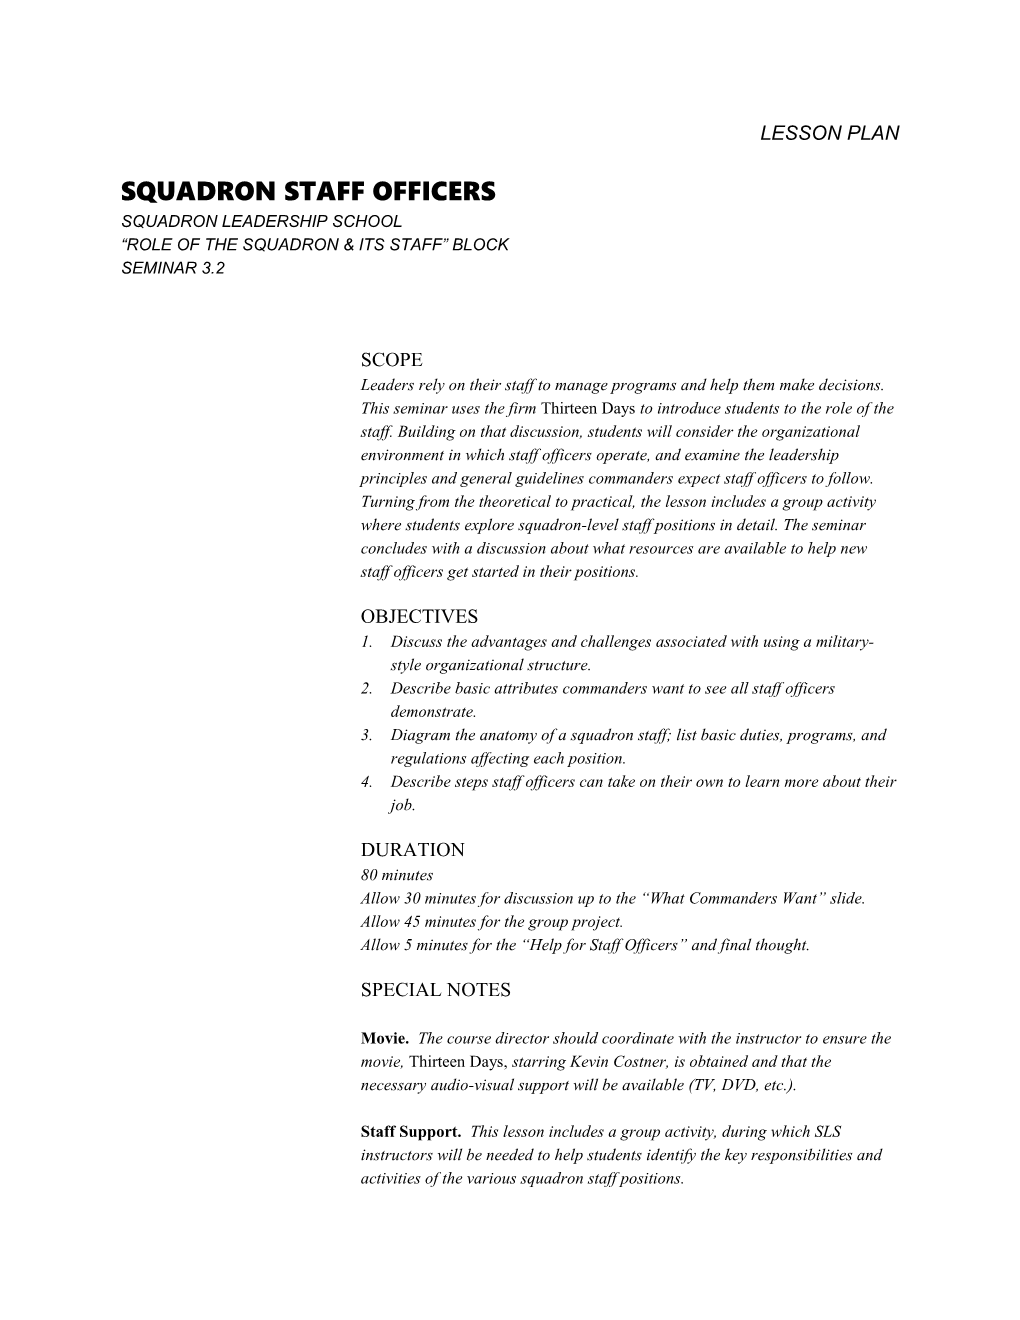 Squadron Staff Officers